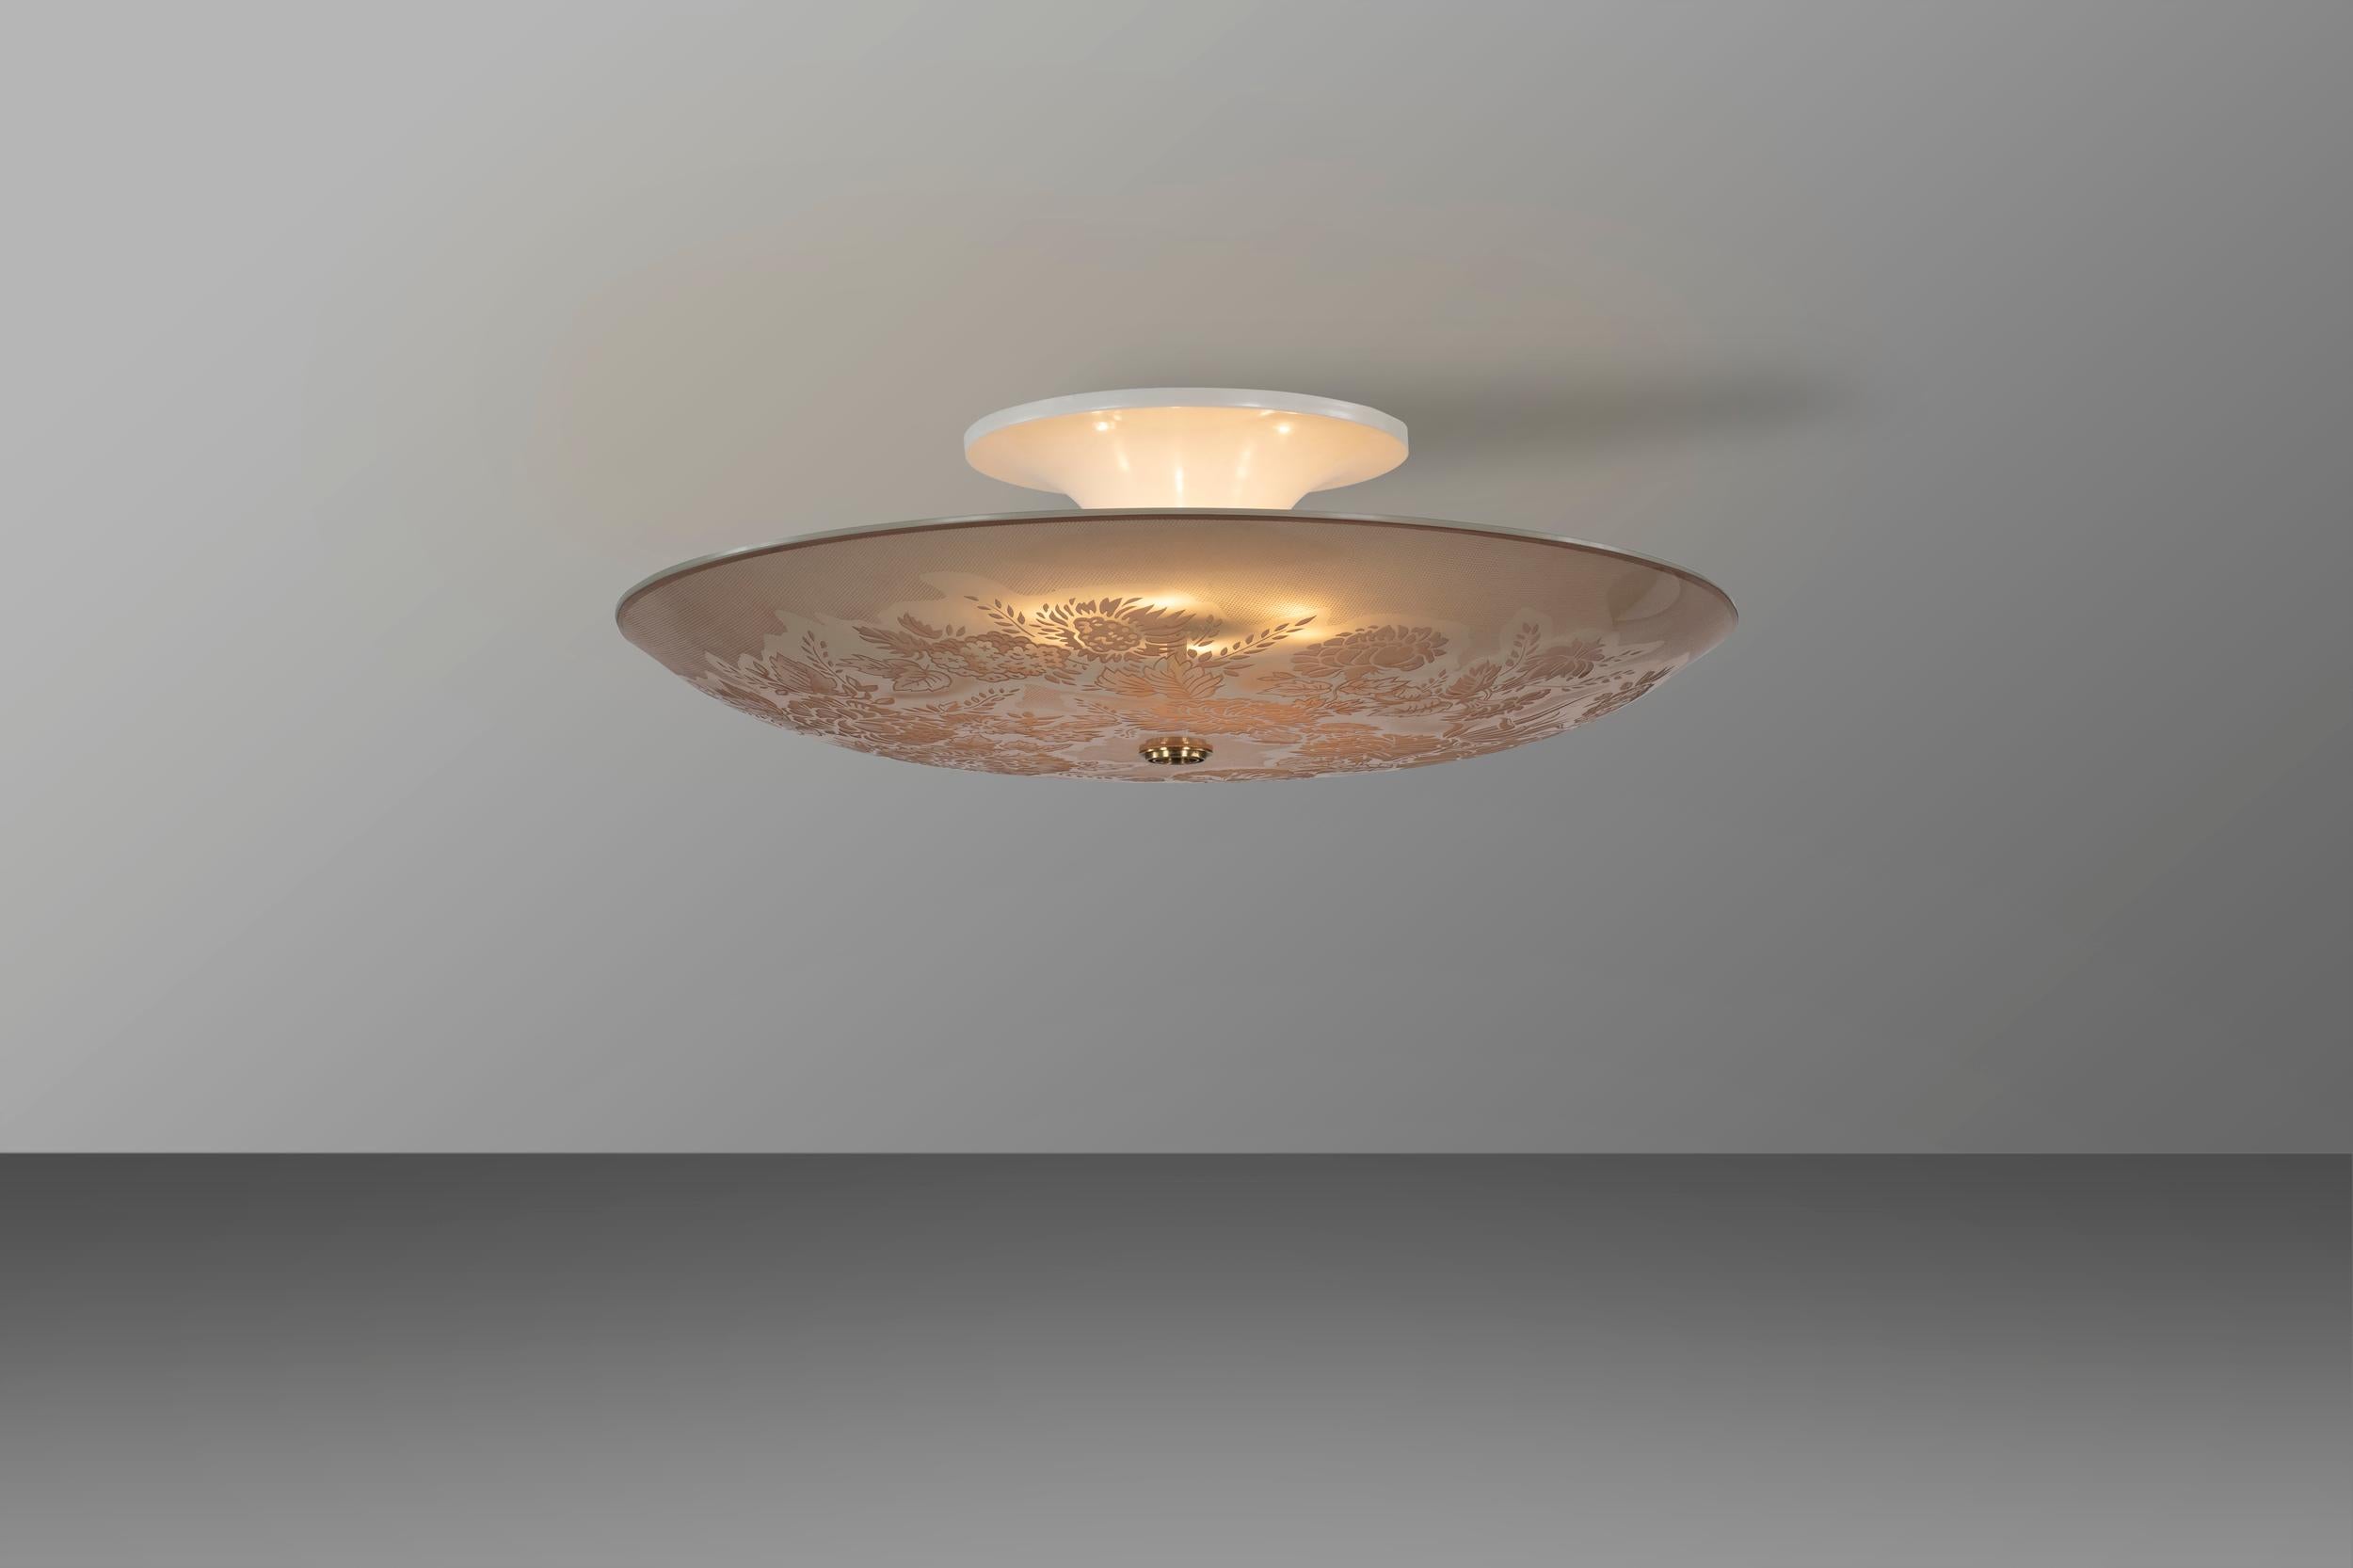 Pietro Chiesa genius and vision made Fontana Arte unique: he is the very first genial artistic director who led the company to become one of the most known and appreciated manufacturers in the artistic glass field. This ceiling light is elegant and